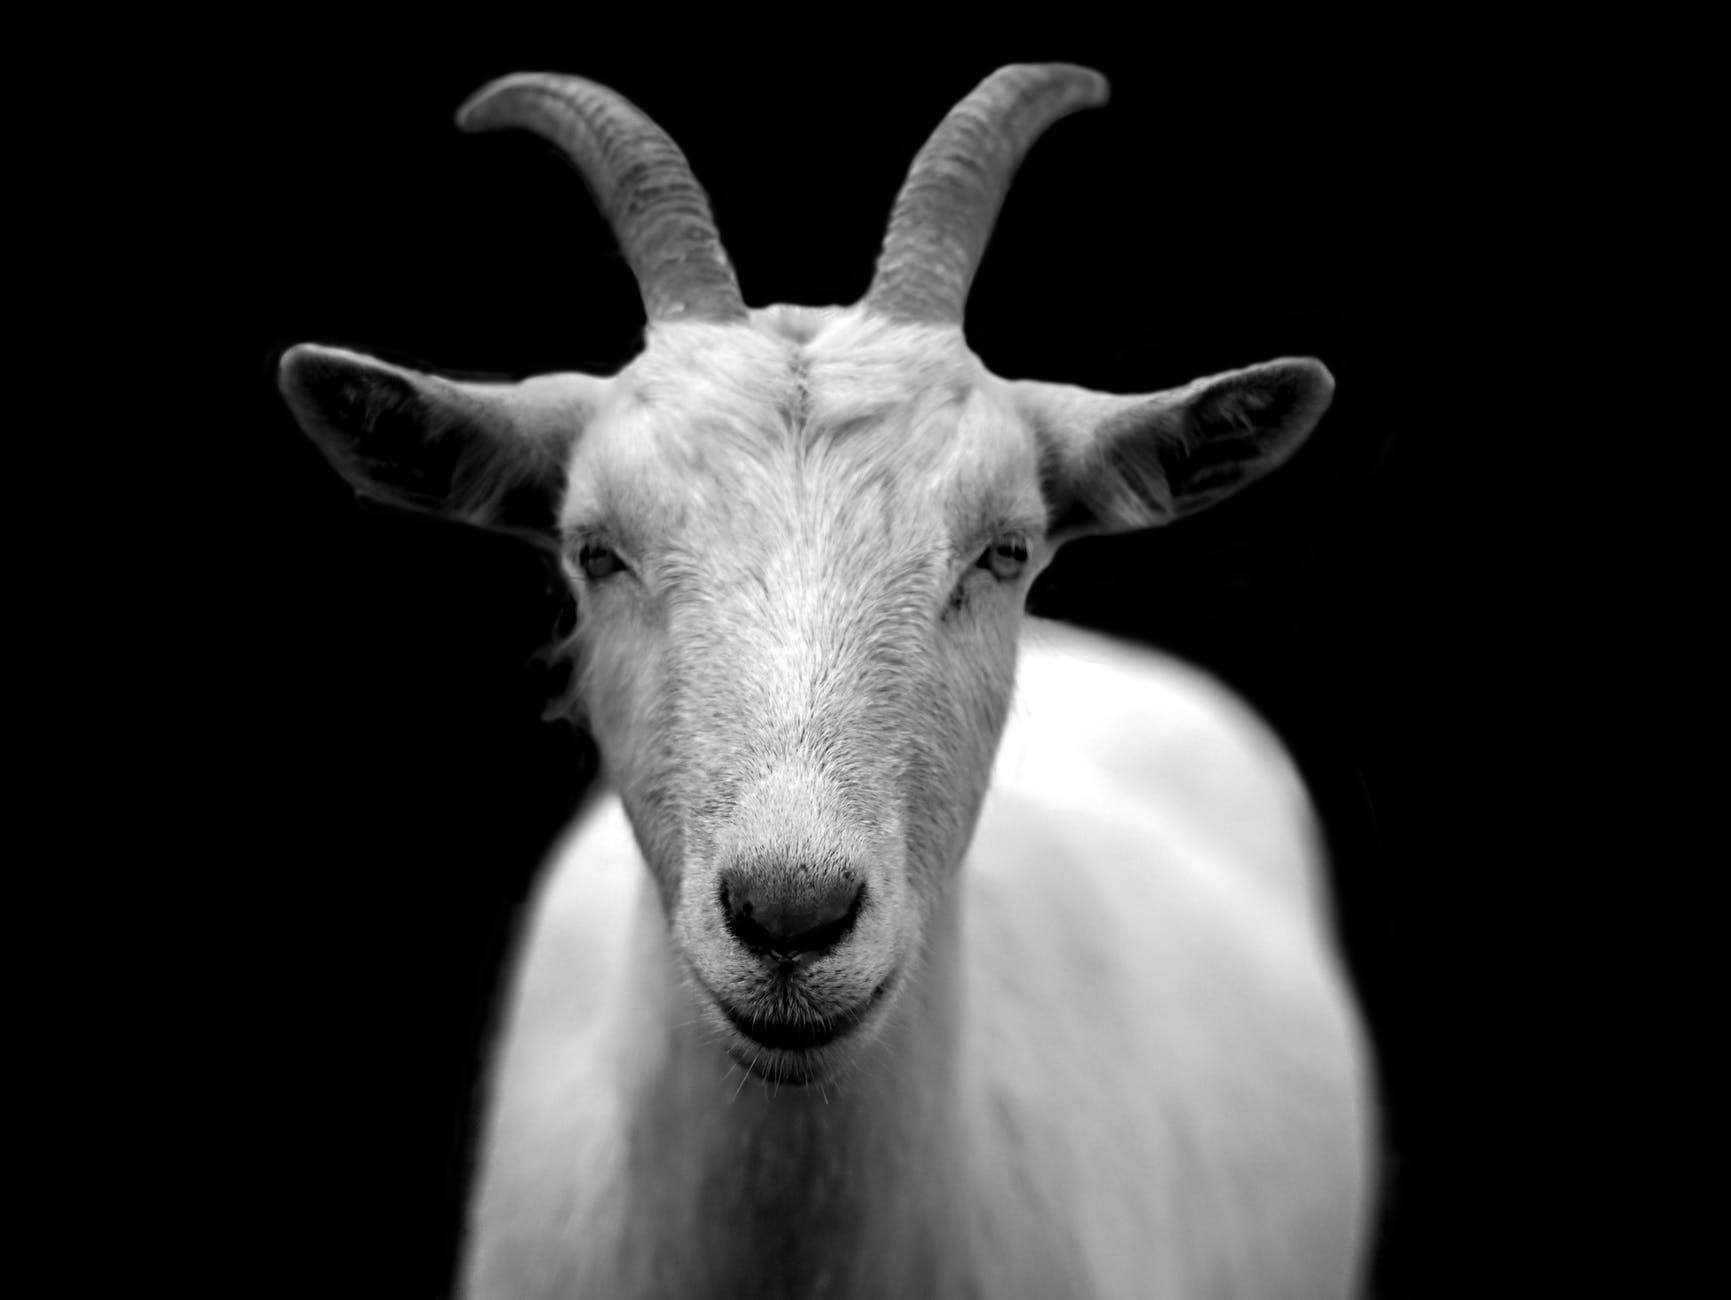 Escape Goat - In sacrificial times, they believed the people's sins were passed onto a goat and it was released. #EscapeGoat